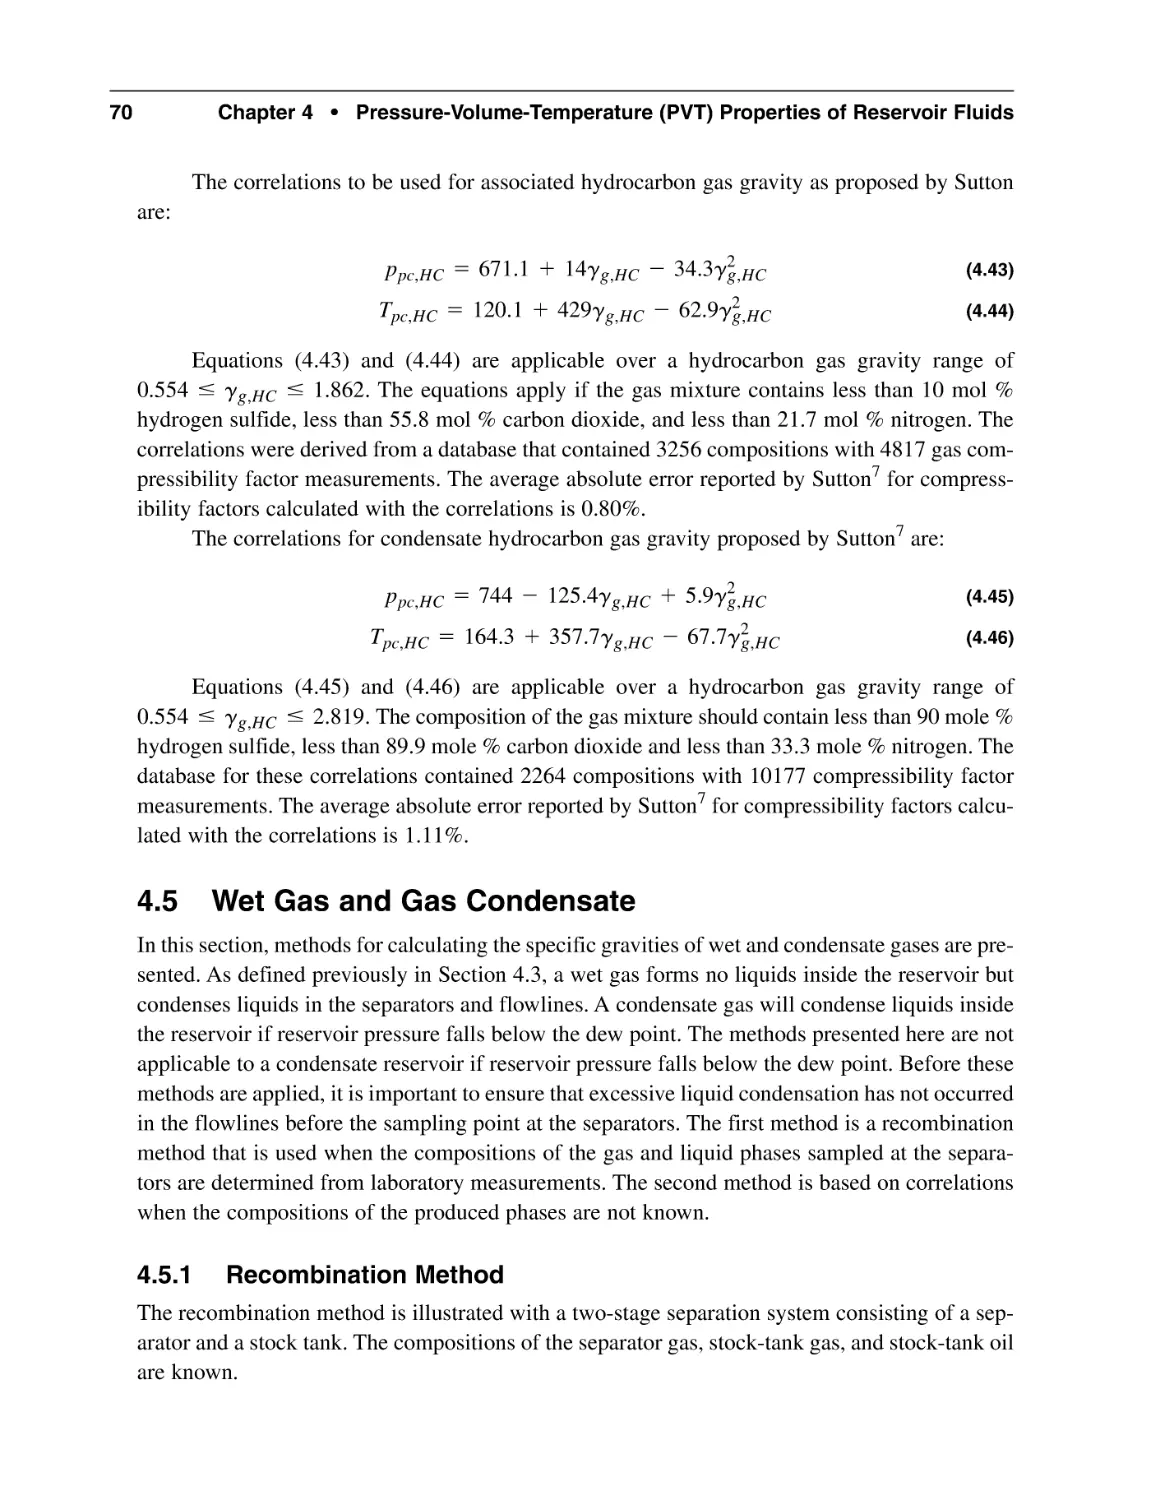 4.5 Wet Gas and Gas Condensate
4.5.1 Recombination Method